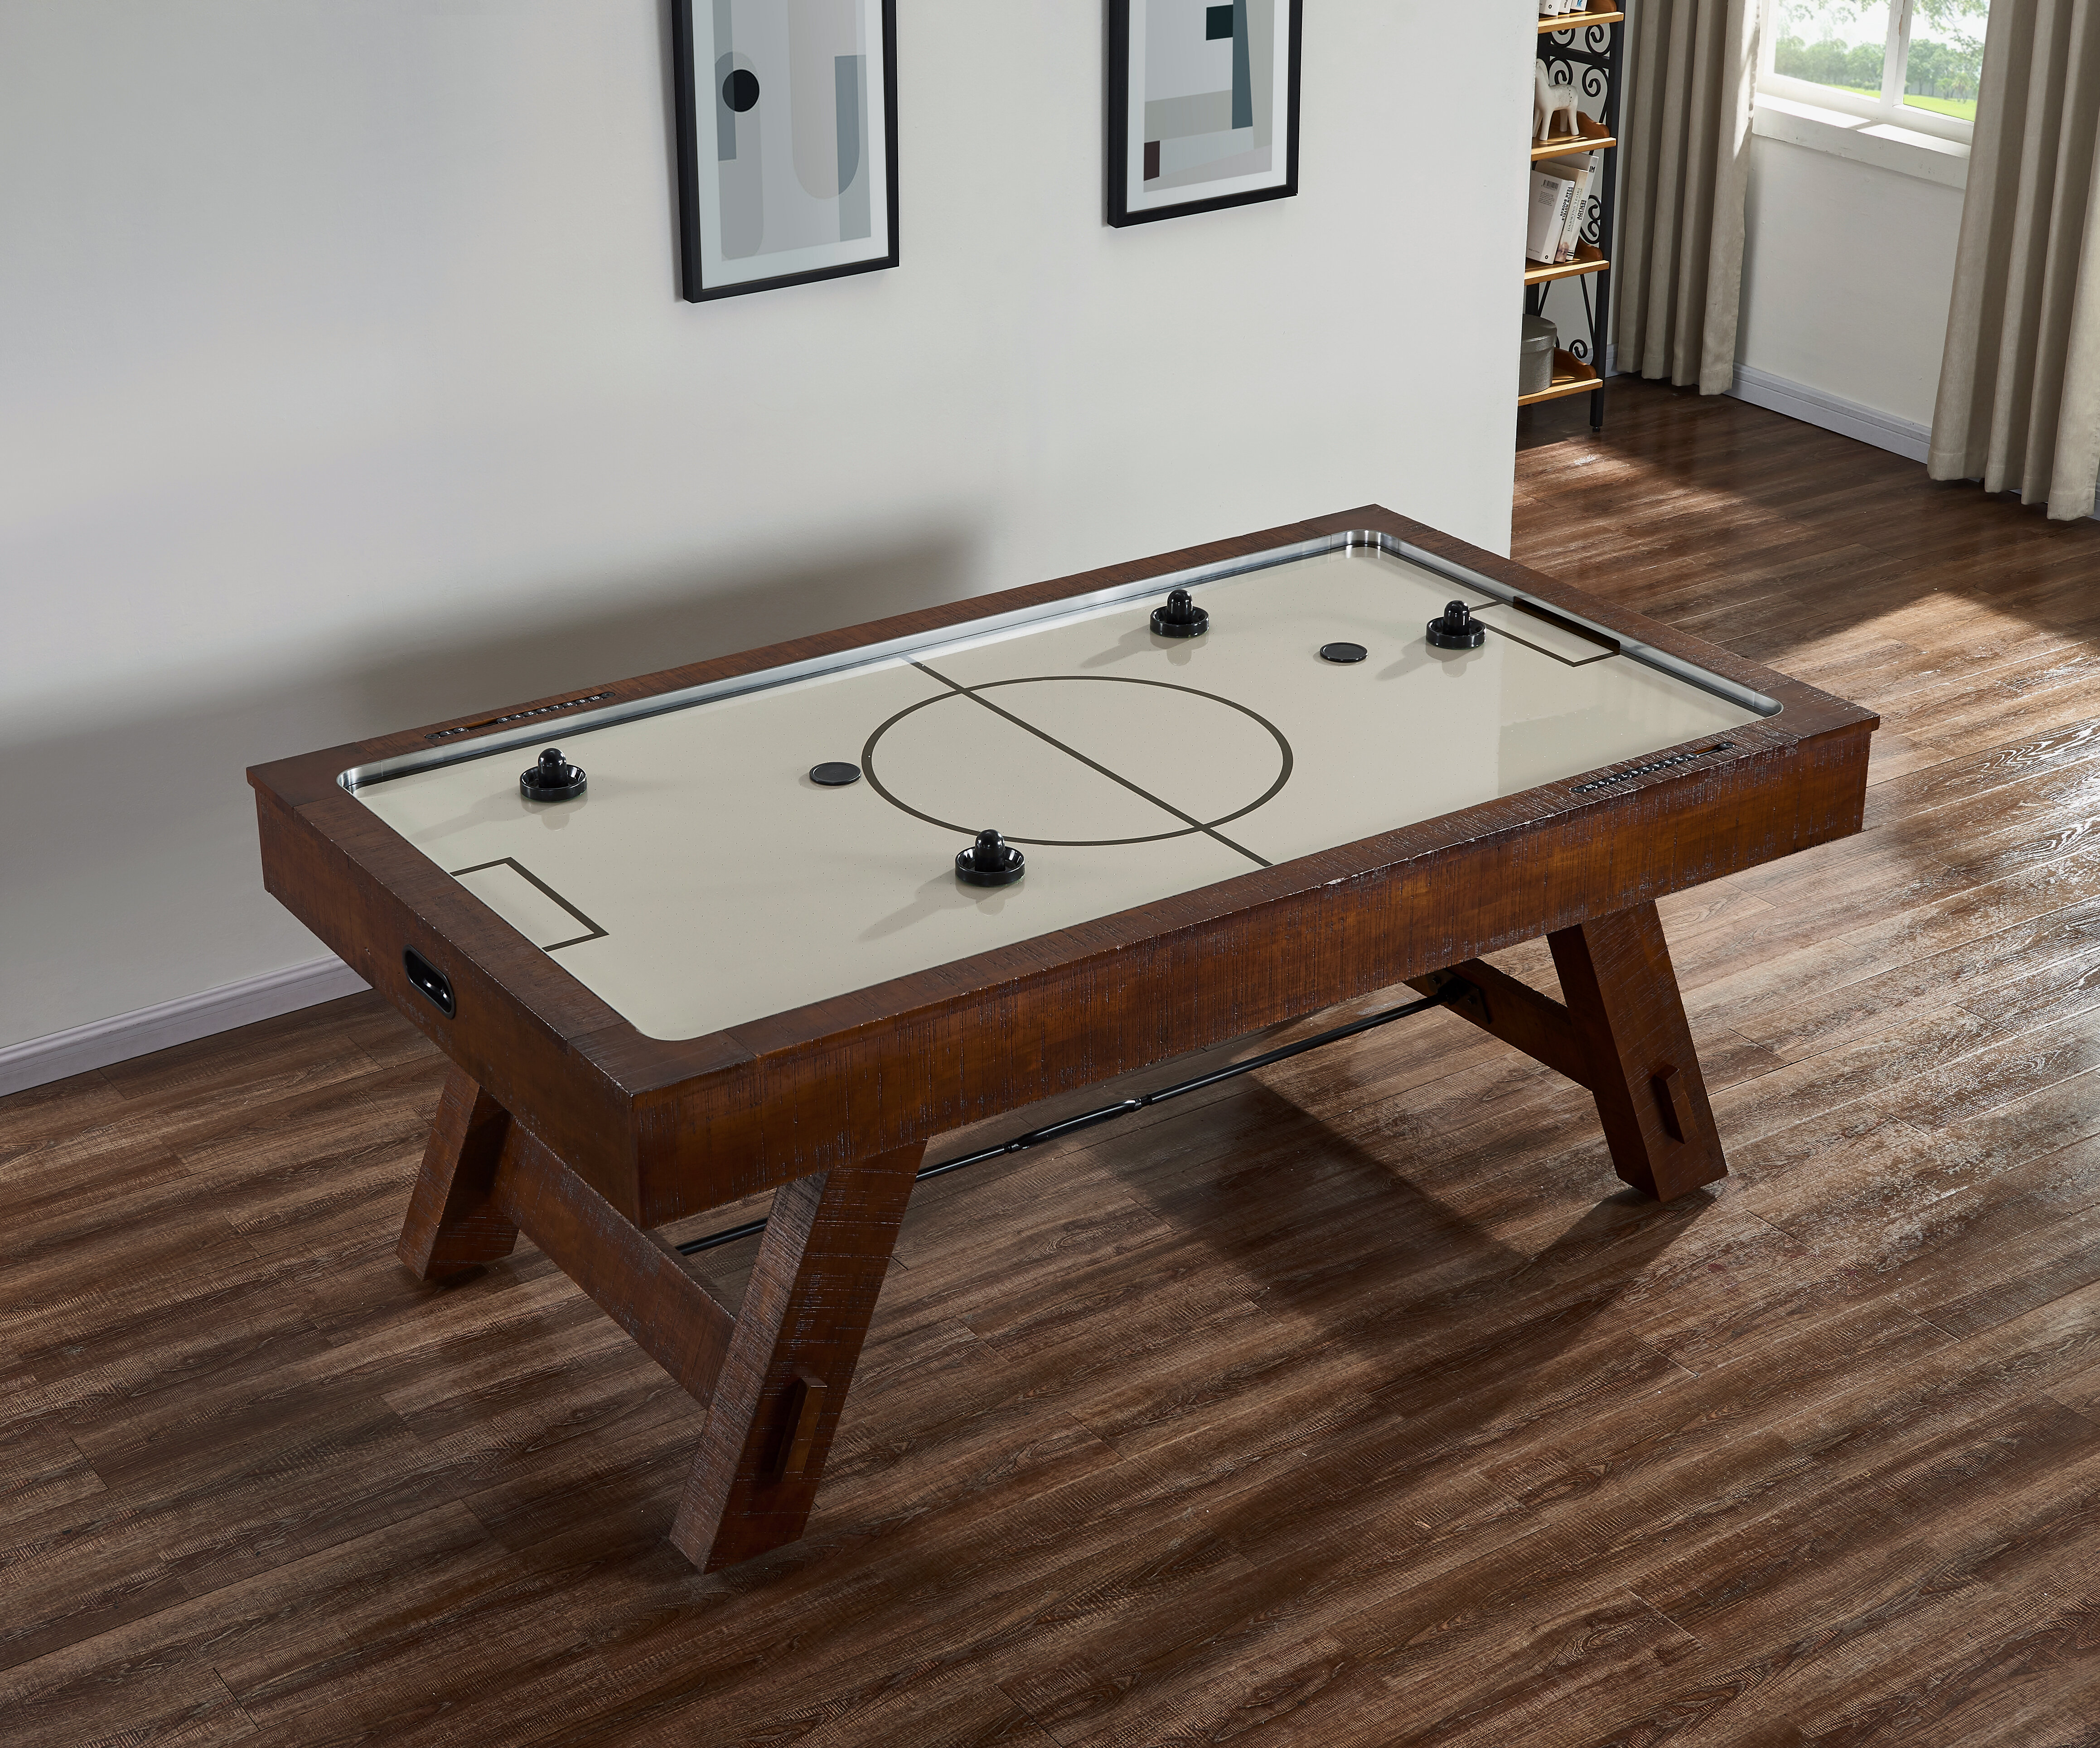 HB Home Telluride HB Home 83 2-Player Air Hockey Table and Reviews Wayfair